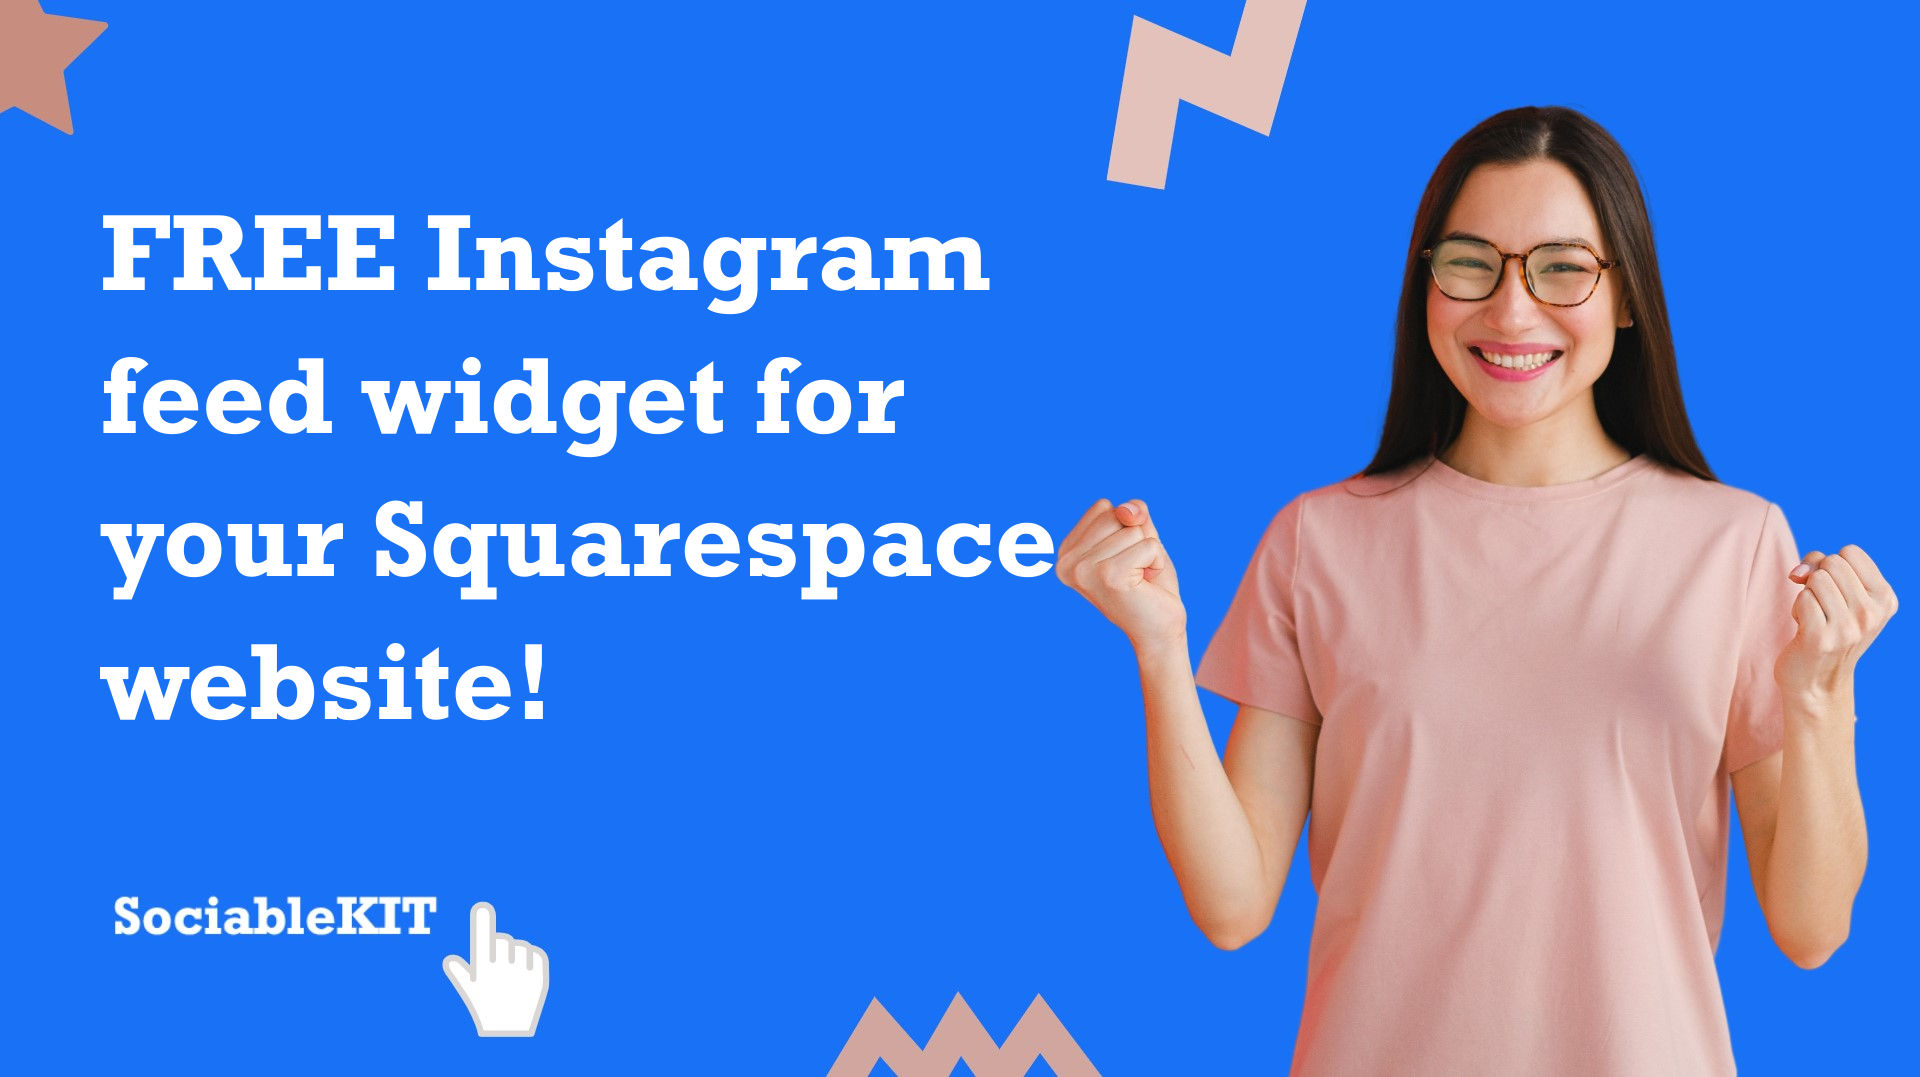 Free Instagram feed widget for your Squarespace website